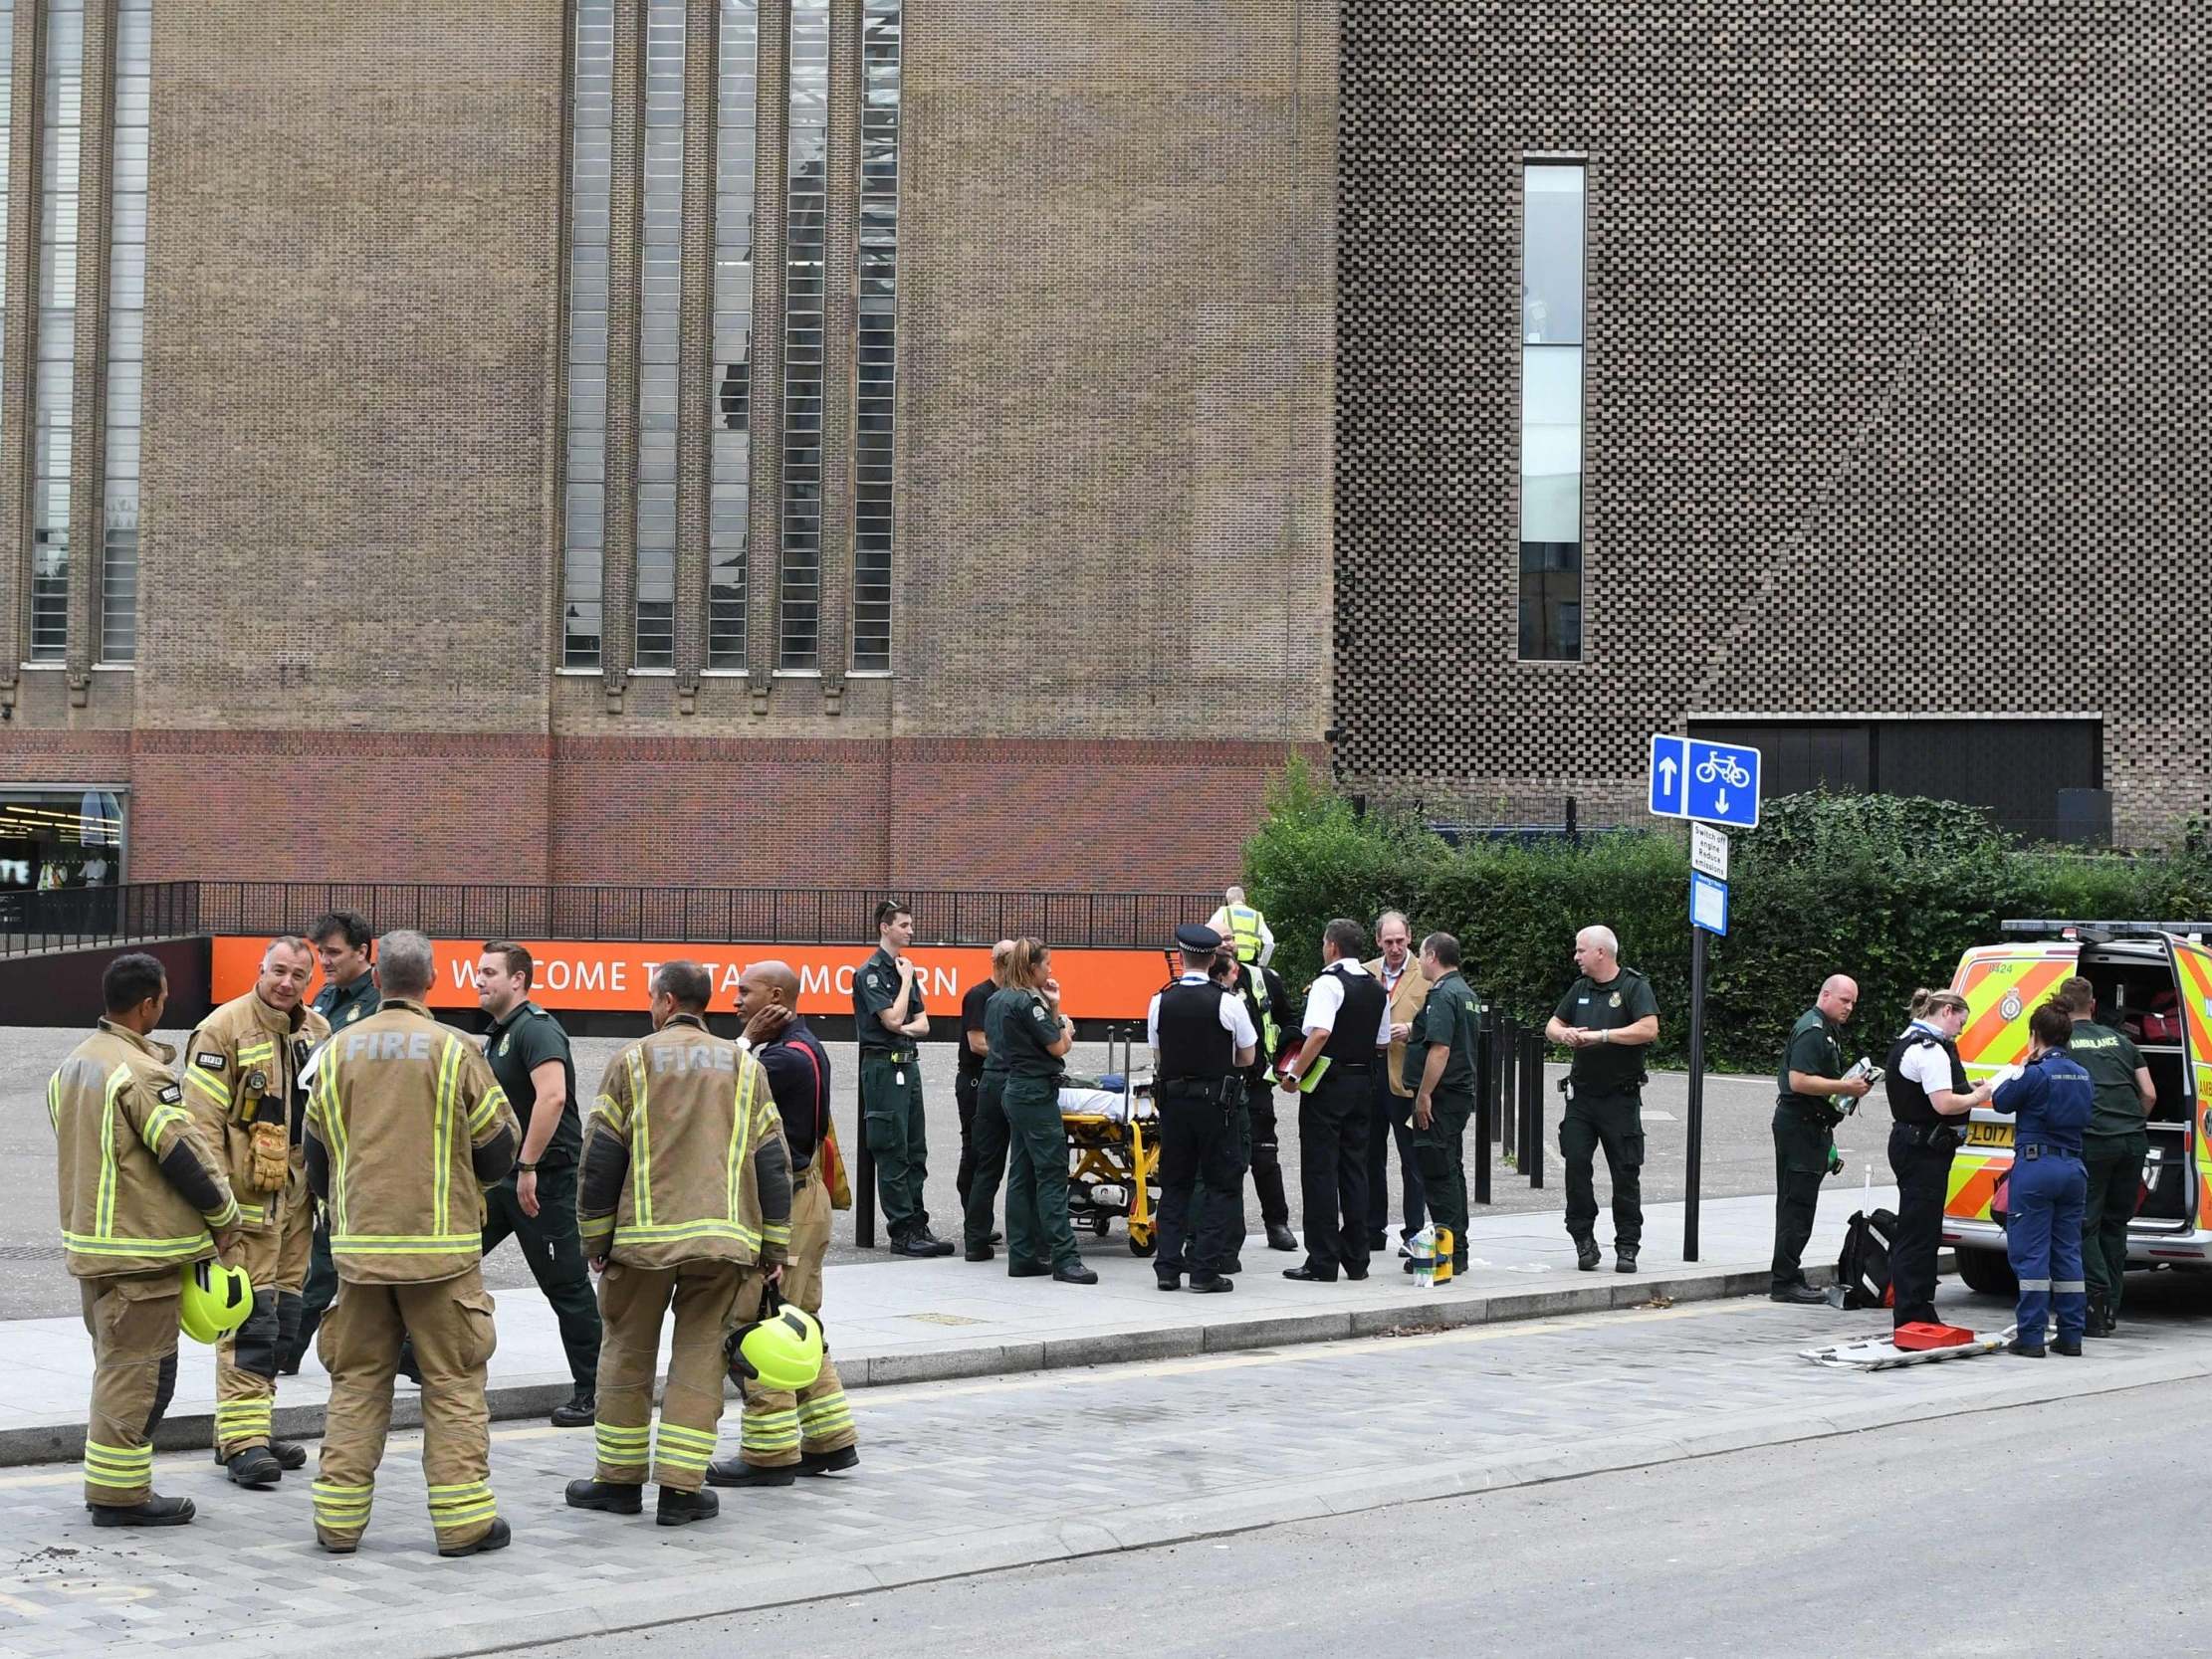 &#13;
Emergency services outside Tate Modern after it was evacuated following the incident &#13;